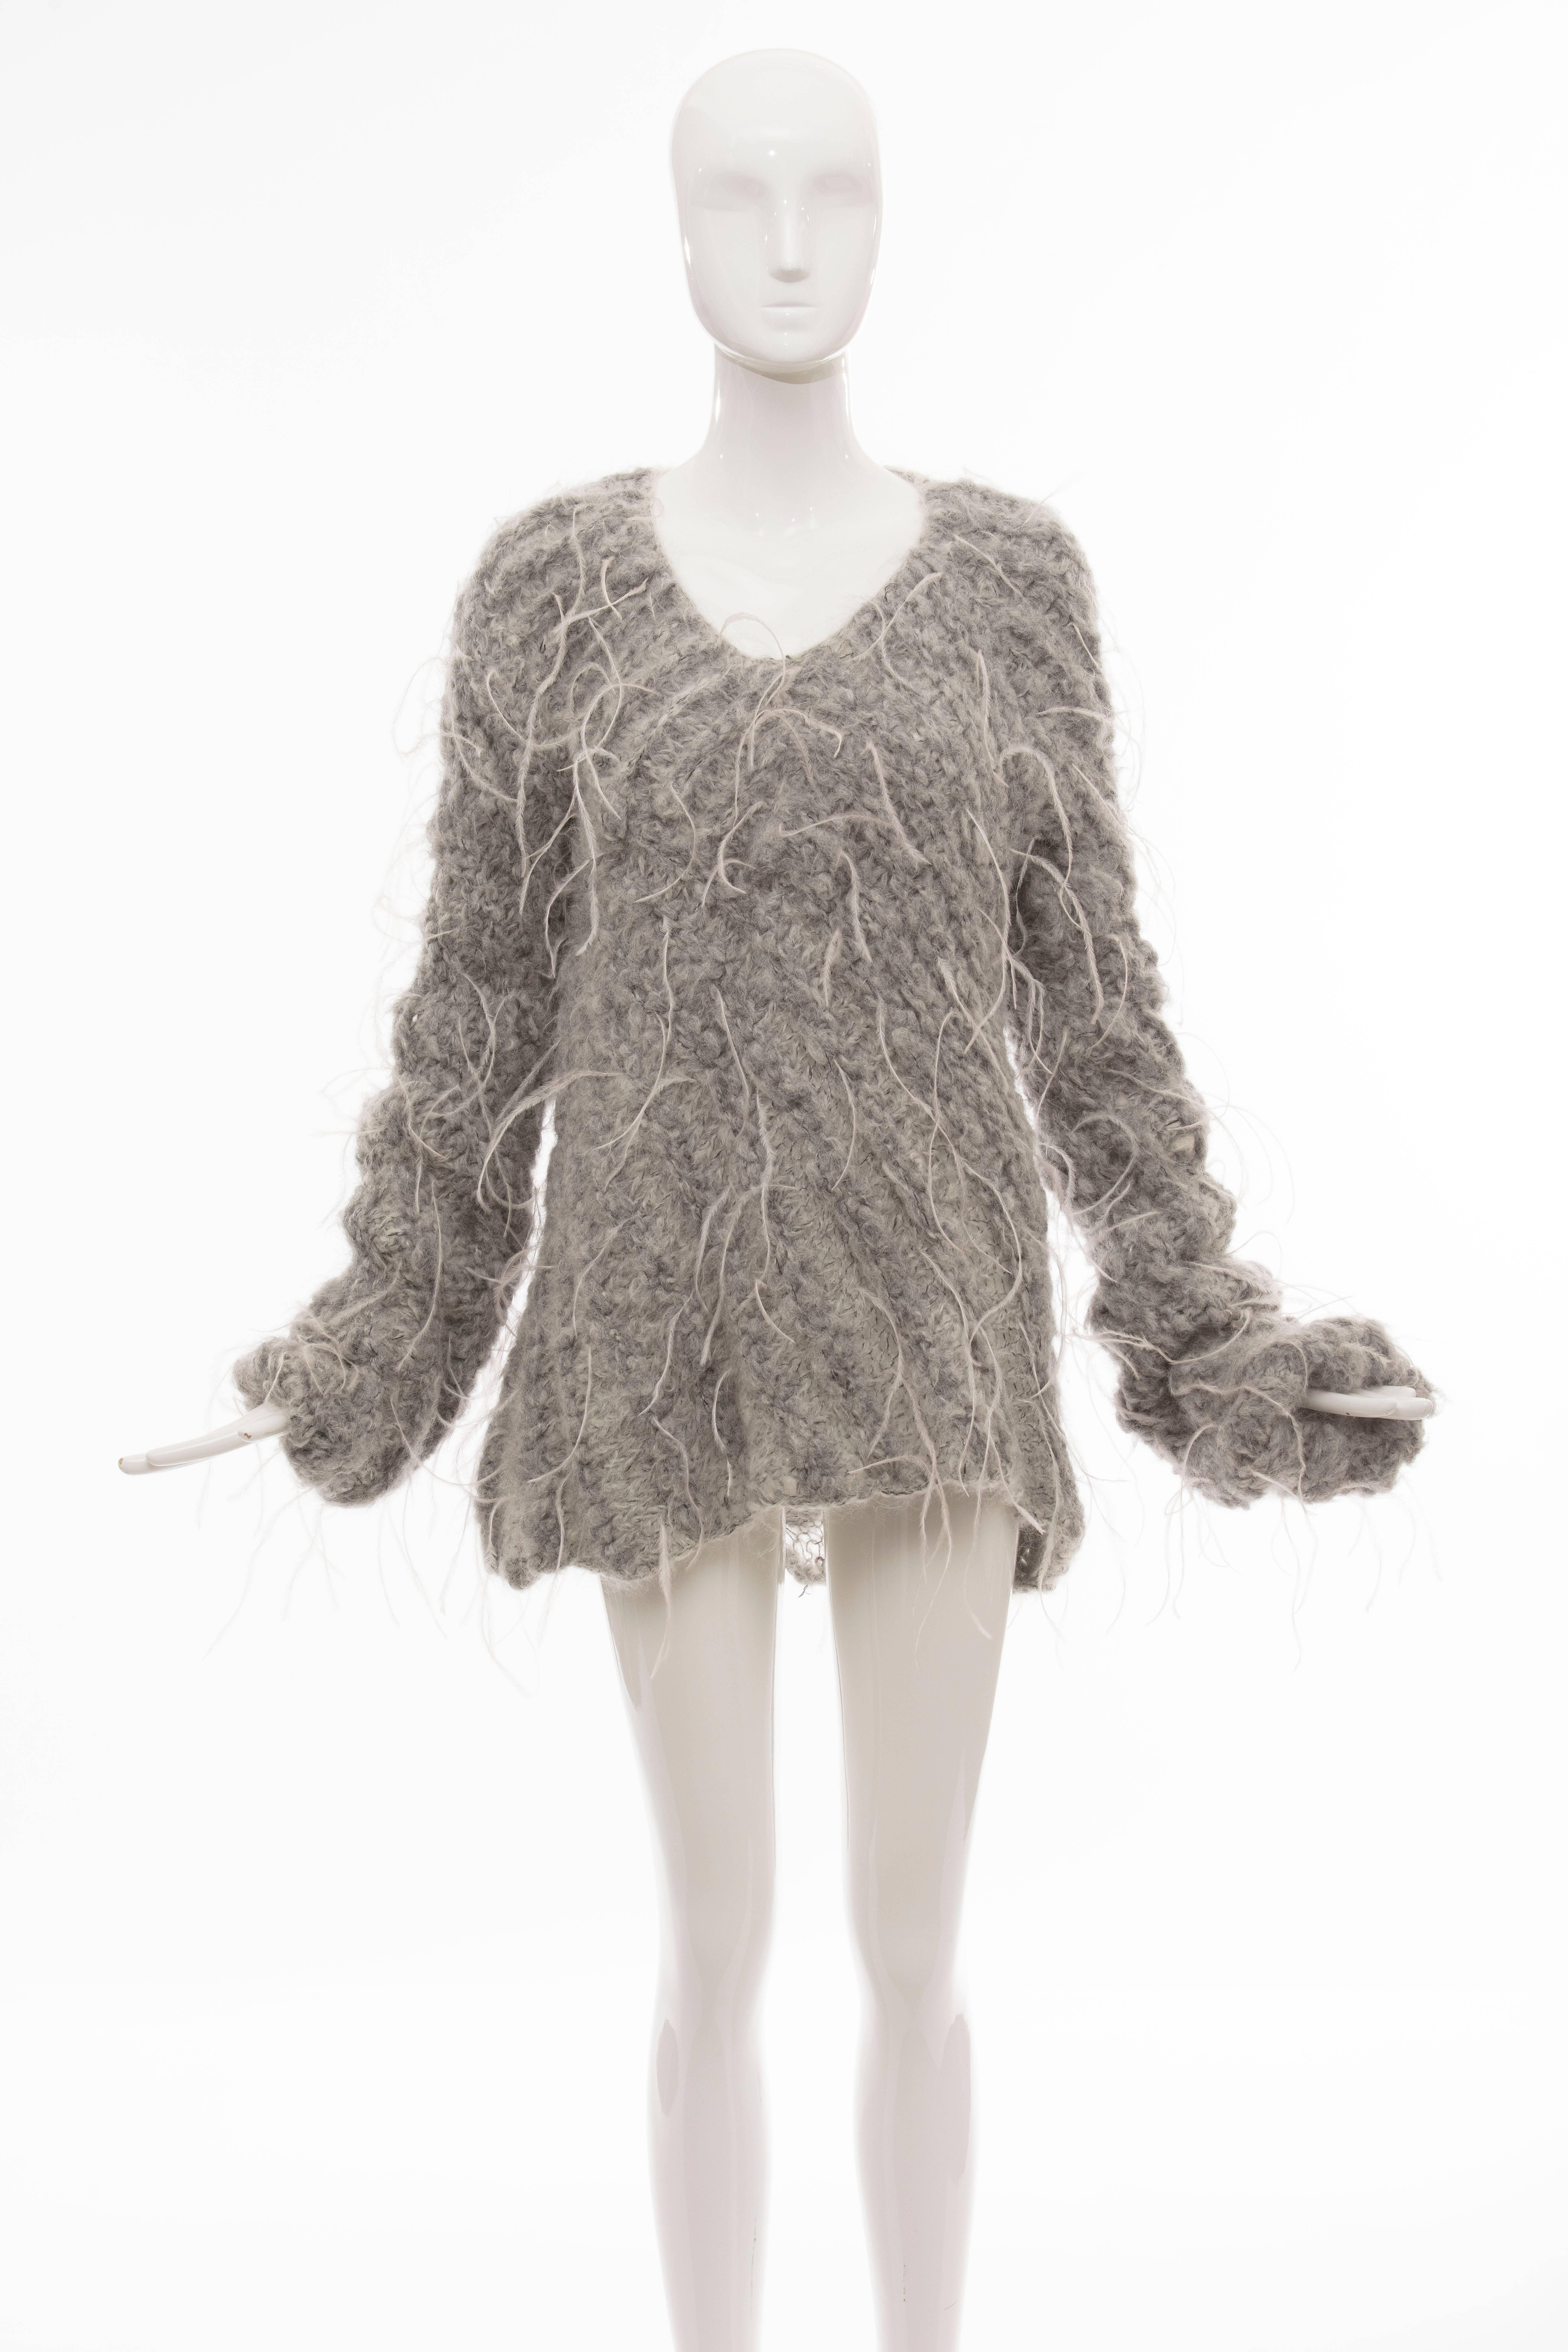 Olivier Theyskens for Nina Ricci oversize alpaca and mohair sweater with ostrich feathers throughout, V-neck and exaggerated long sleeves. 

No Size Label

Bust: 38, Waist 40, Length 30
